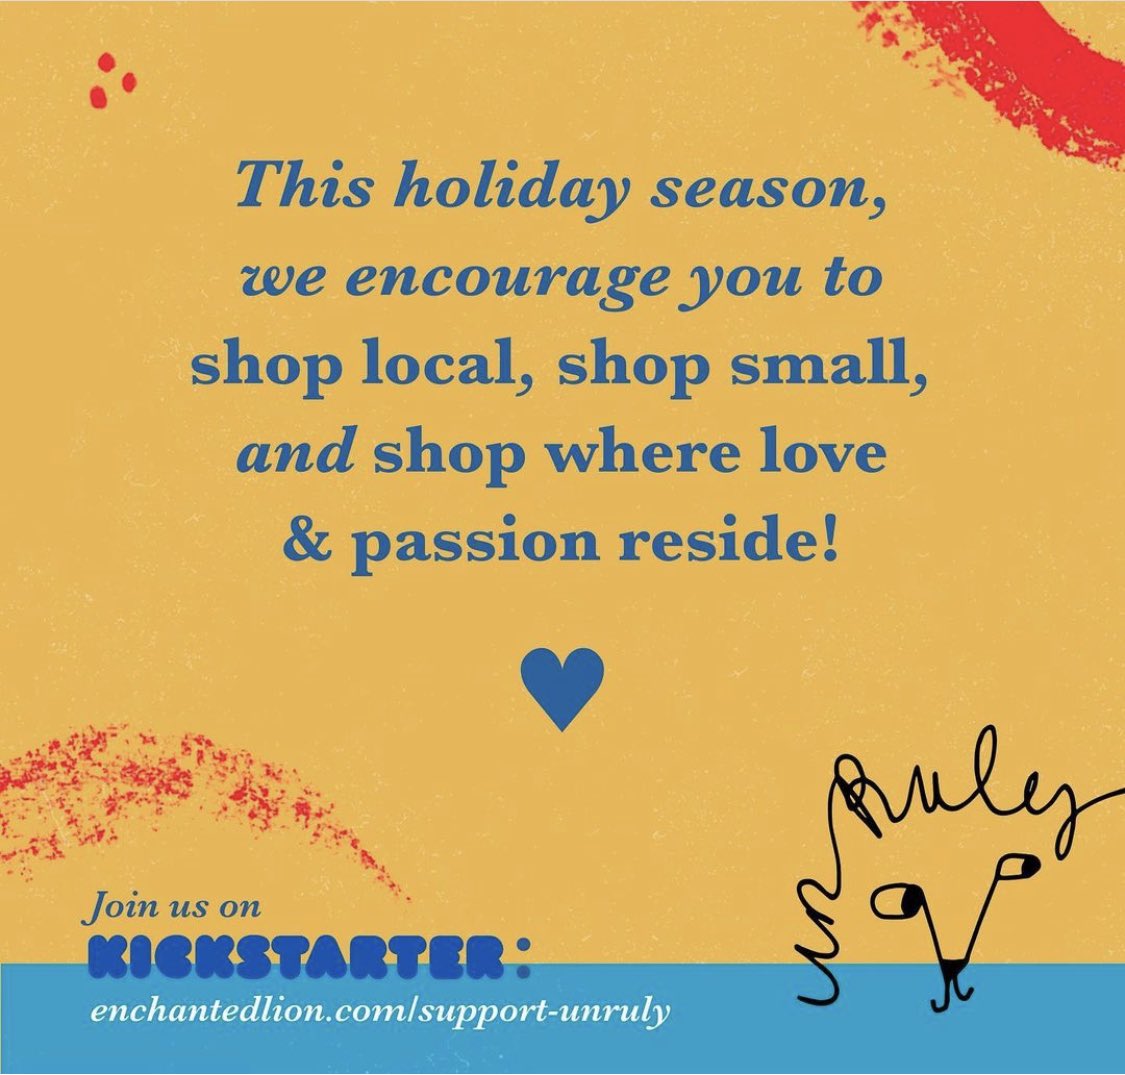 A call today on #SmallBusinessSaturday—& every day beyond—to remember all indies and the sheer vital fact of independence this holiday season, with our enormous thanks, as always, for being our readers & advocates 💛 #shopsmall #shoplocal #shopearly #supportsmallbusiness